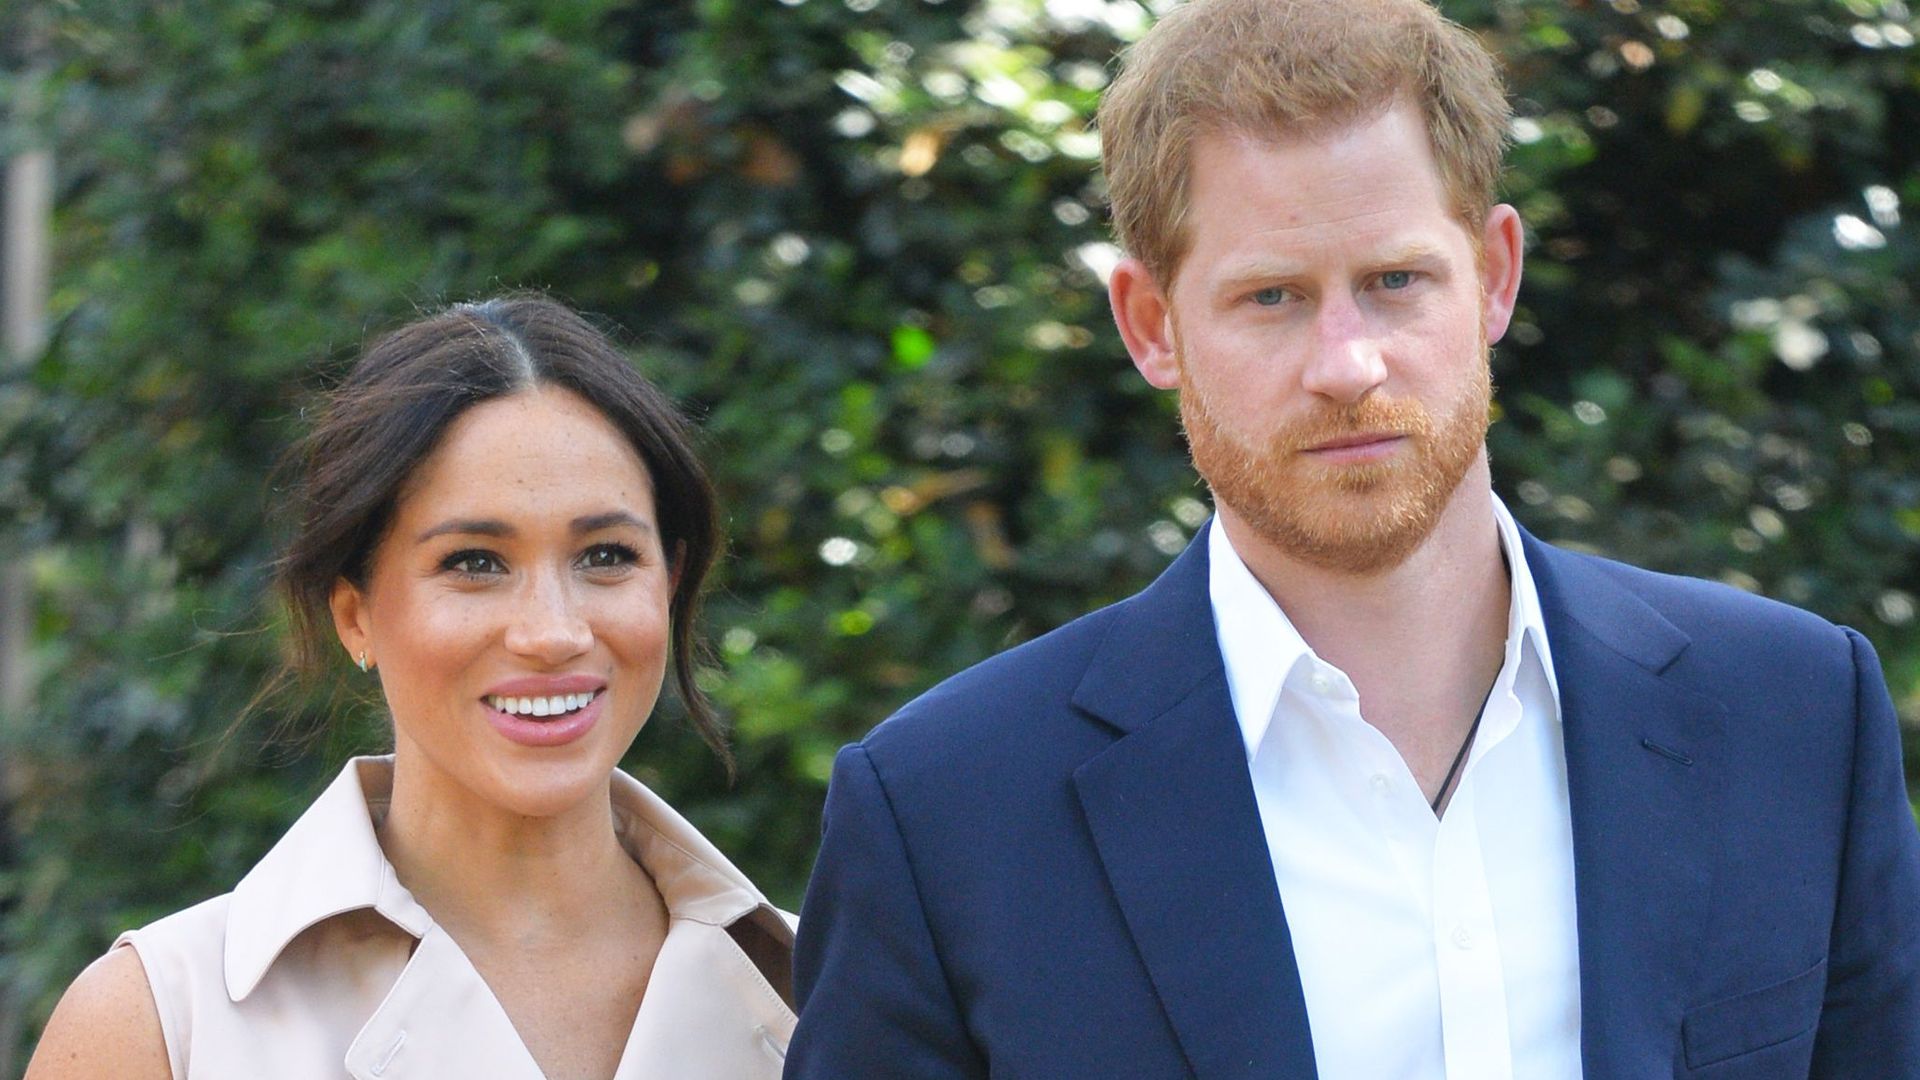 Prince Harry in a blue suit and Meghan Markle in a belted dress